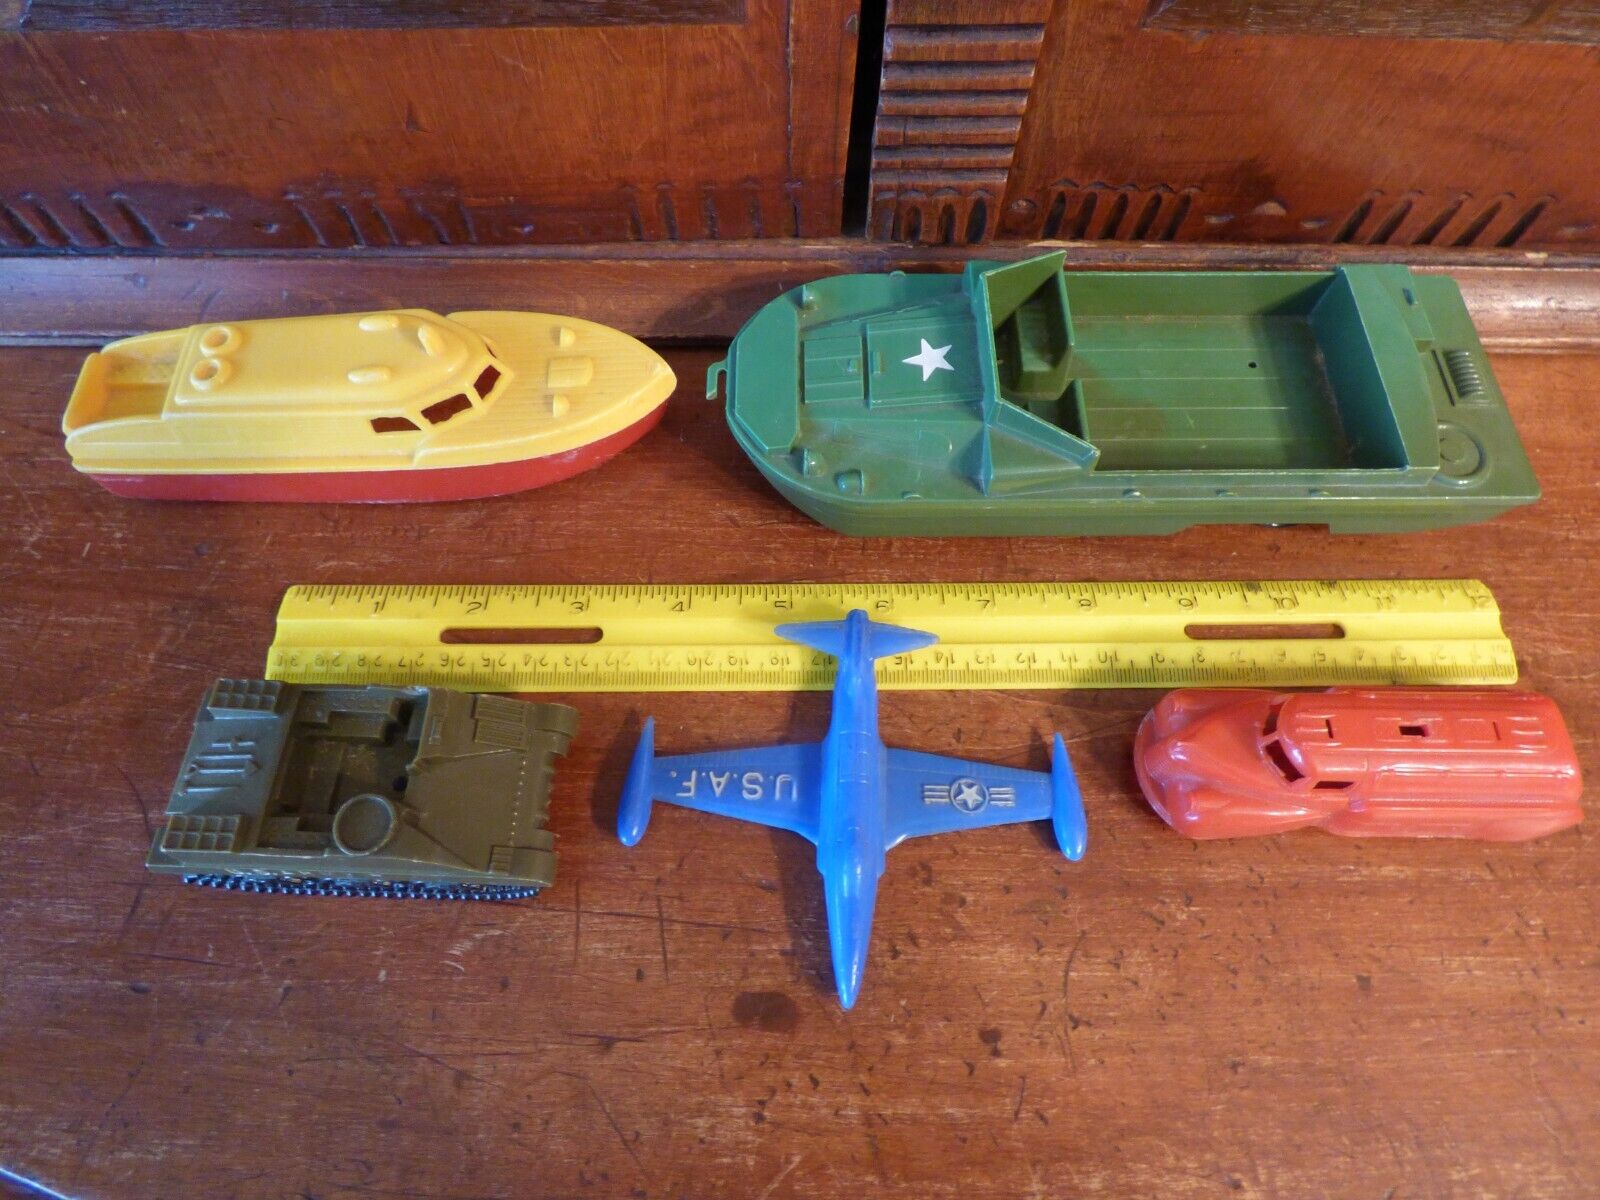 VINTAGE GROUP OF PLASTIC TOYS FROM THE 1940'S, ARMY DUCK, CABIN CRUSIER, F-80-C